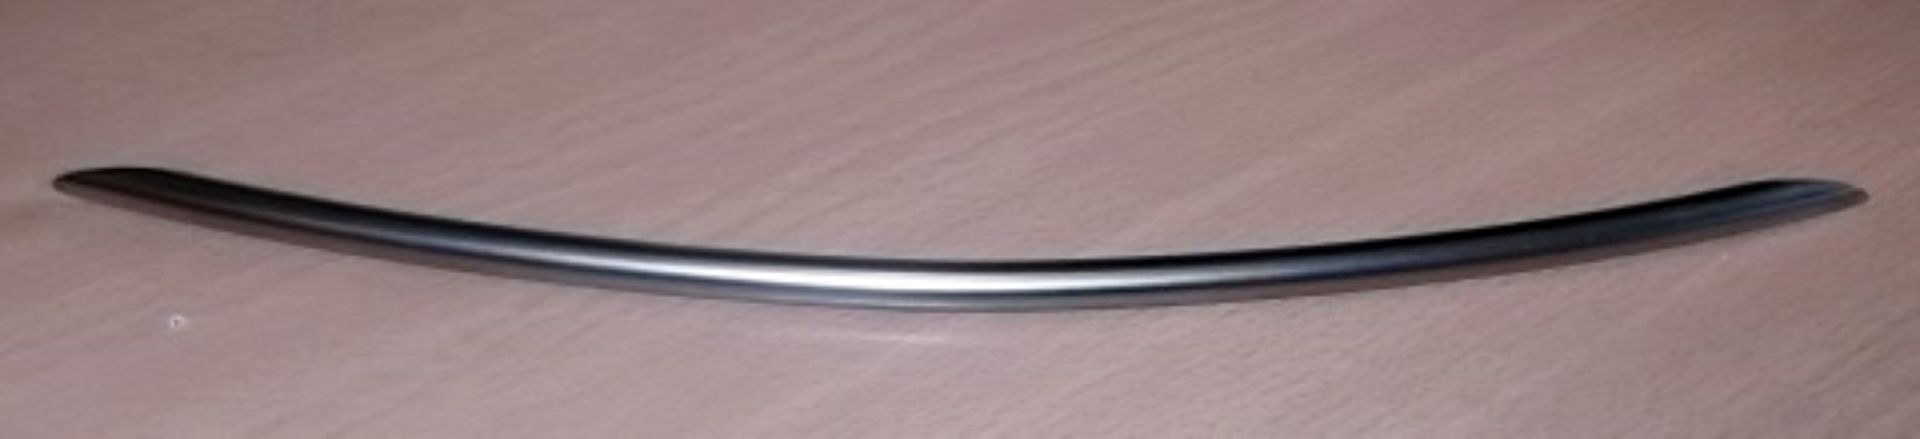 400 x BOW Handle Kitchen Door Handles By Crestwood - 320mm - New Stock - Brushed Nickel Finish - - Image 7 of 10